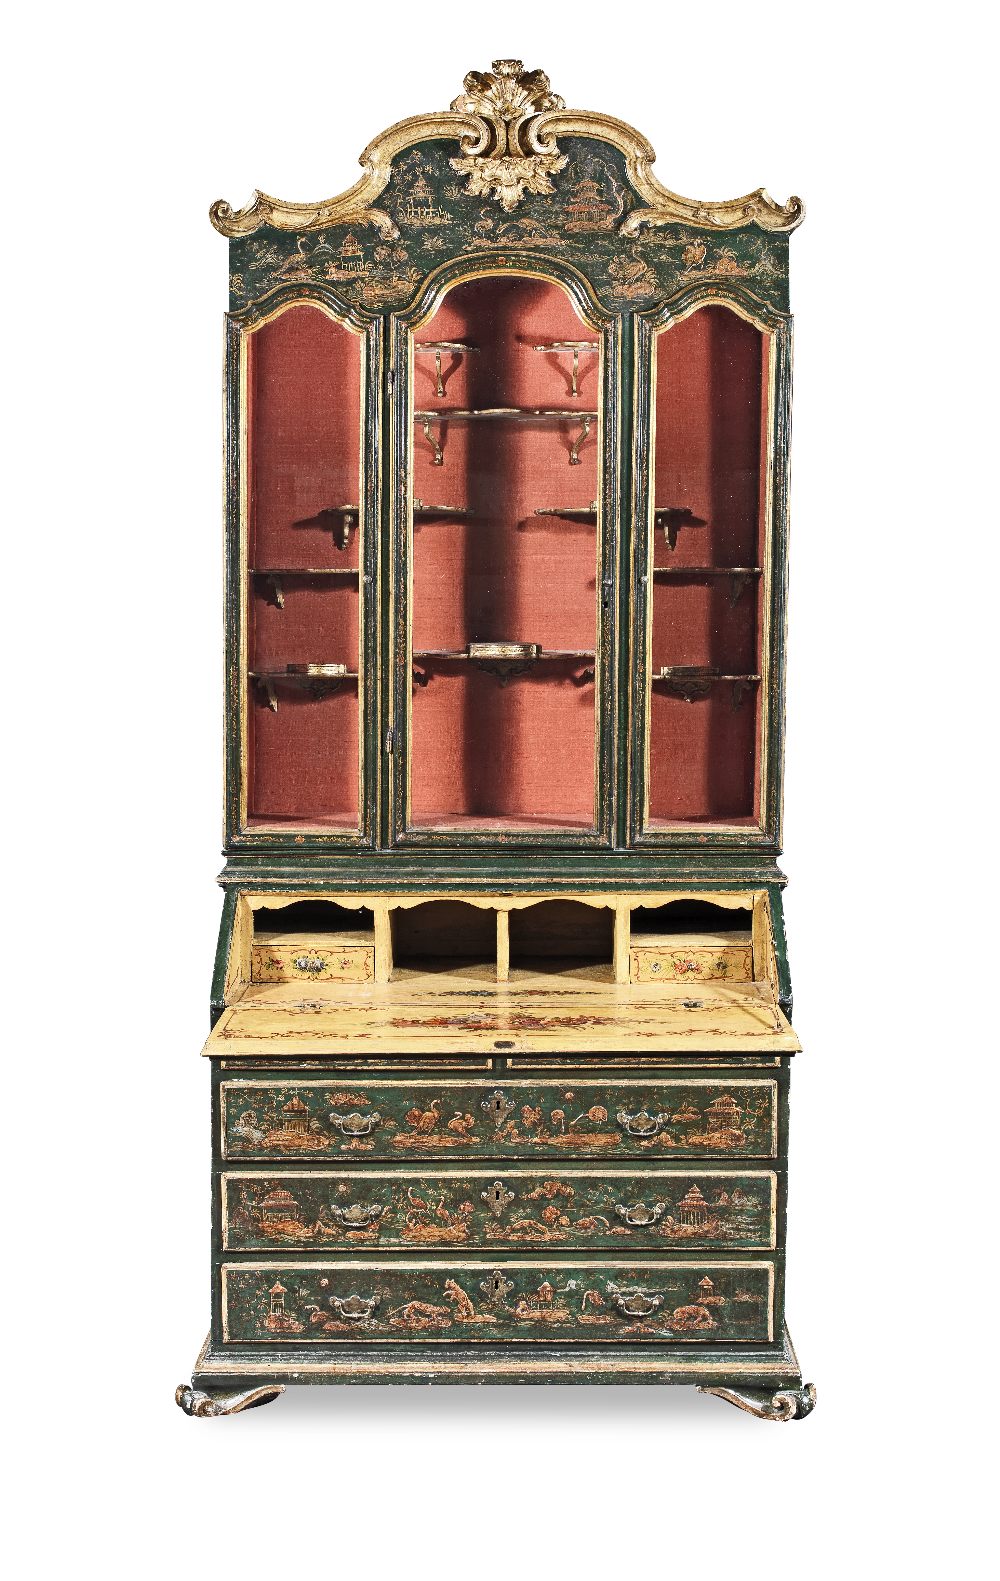 A LARGE ITALIAN 18TH CENTURY JAPANNED AND PARCEL-GILT BUREAU CABINETAlmost certainly Venetian, t... - Image 2 of 3